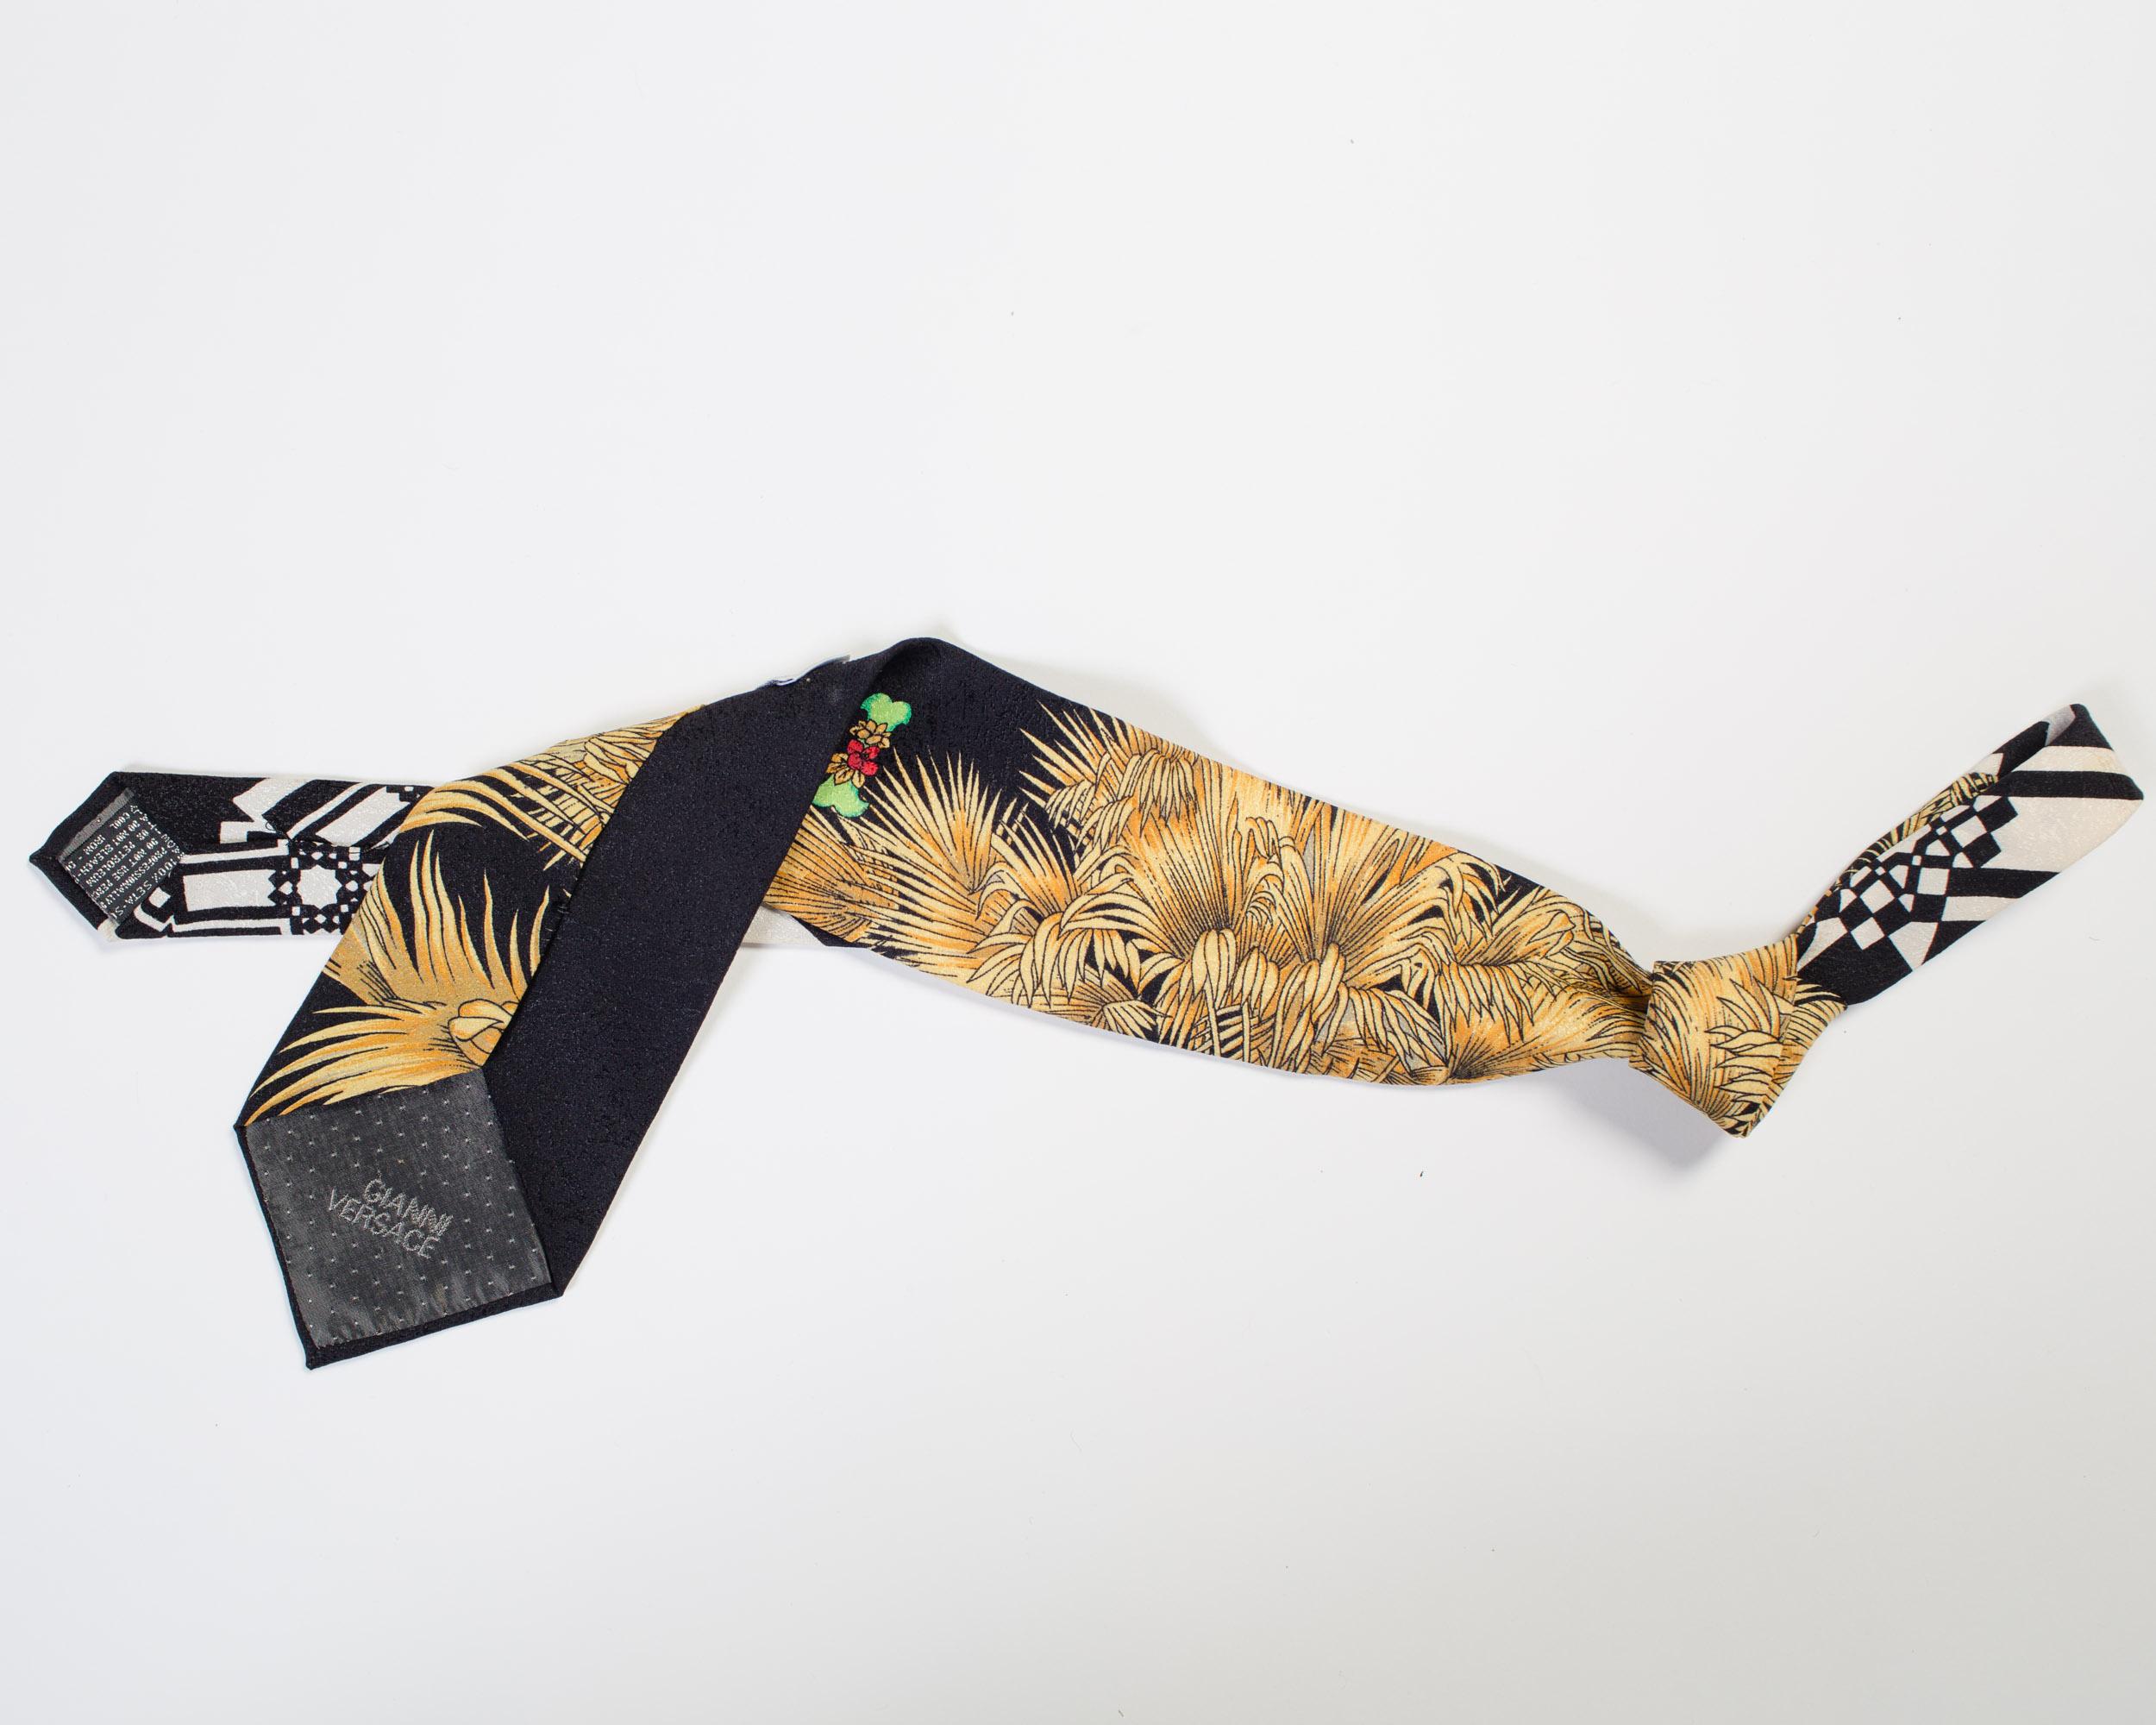 Gray 1990S GIANNI VERSACE Black Miami Tie With Gold Palm Trees For Sale